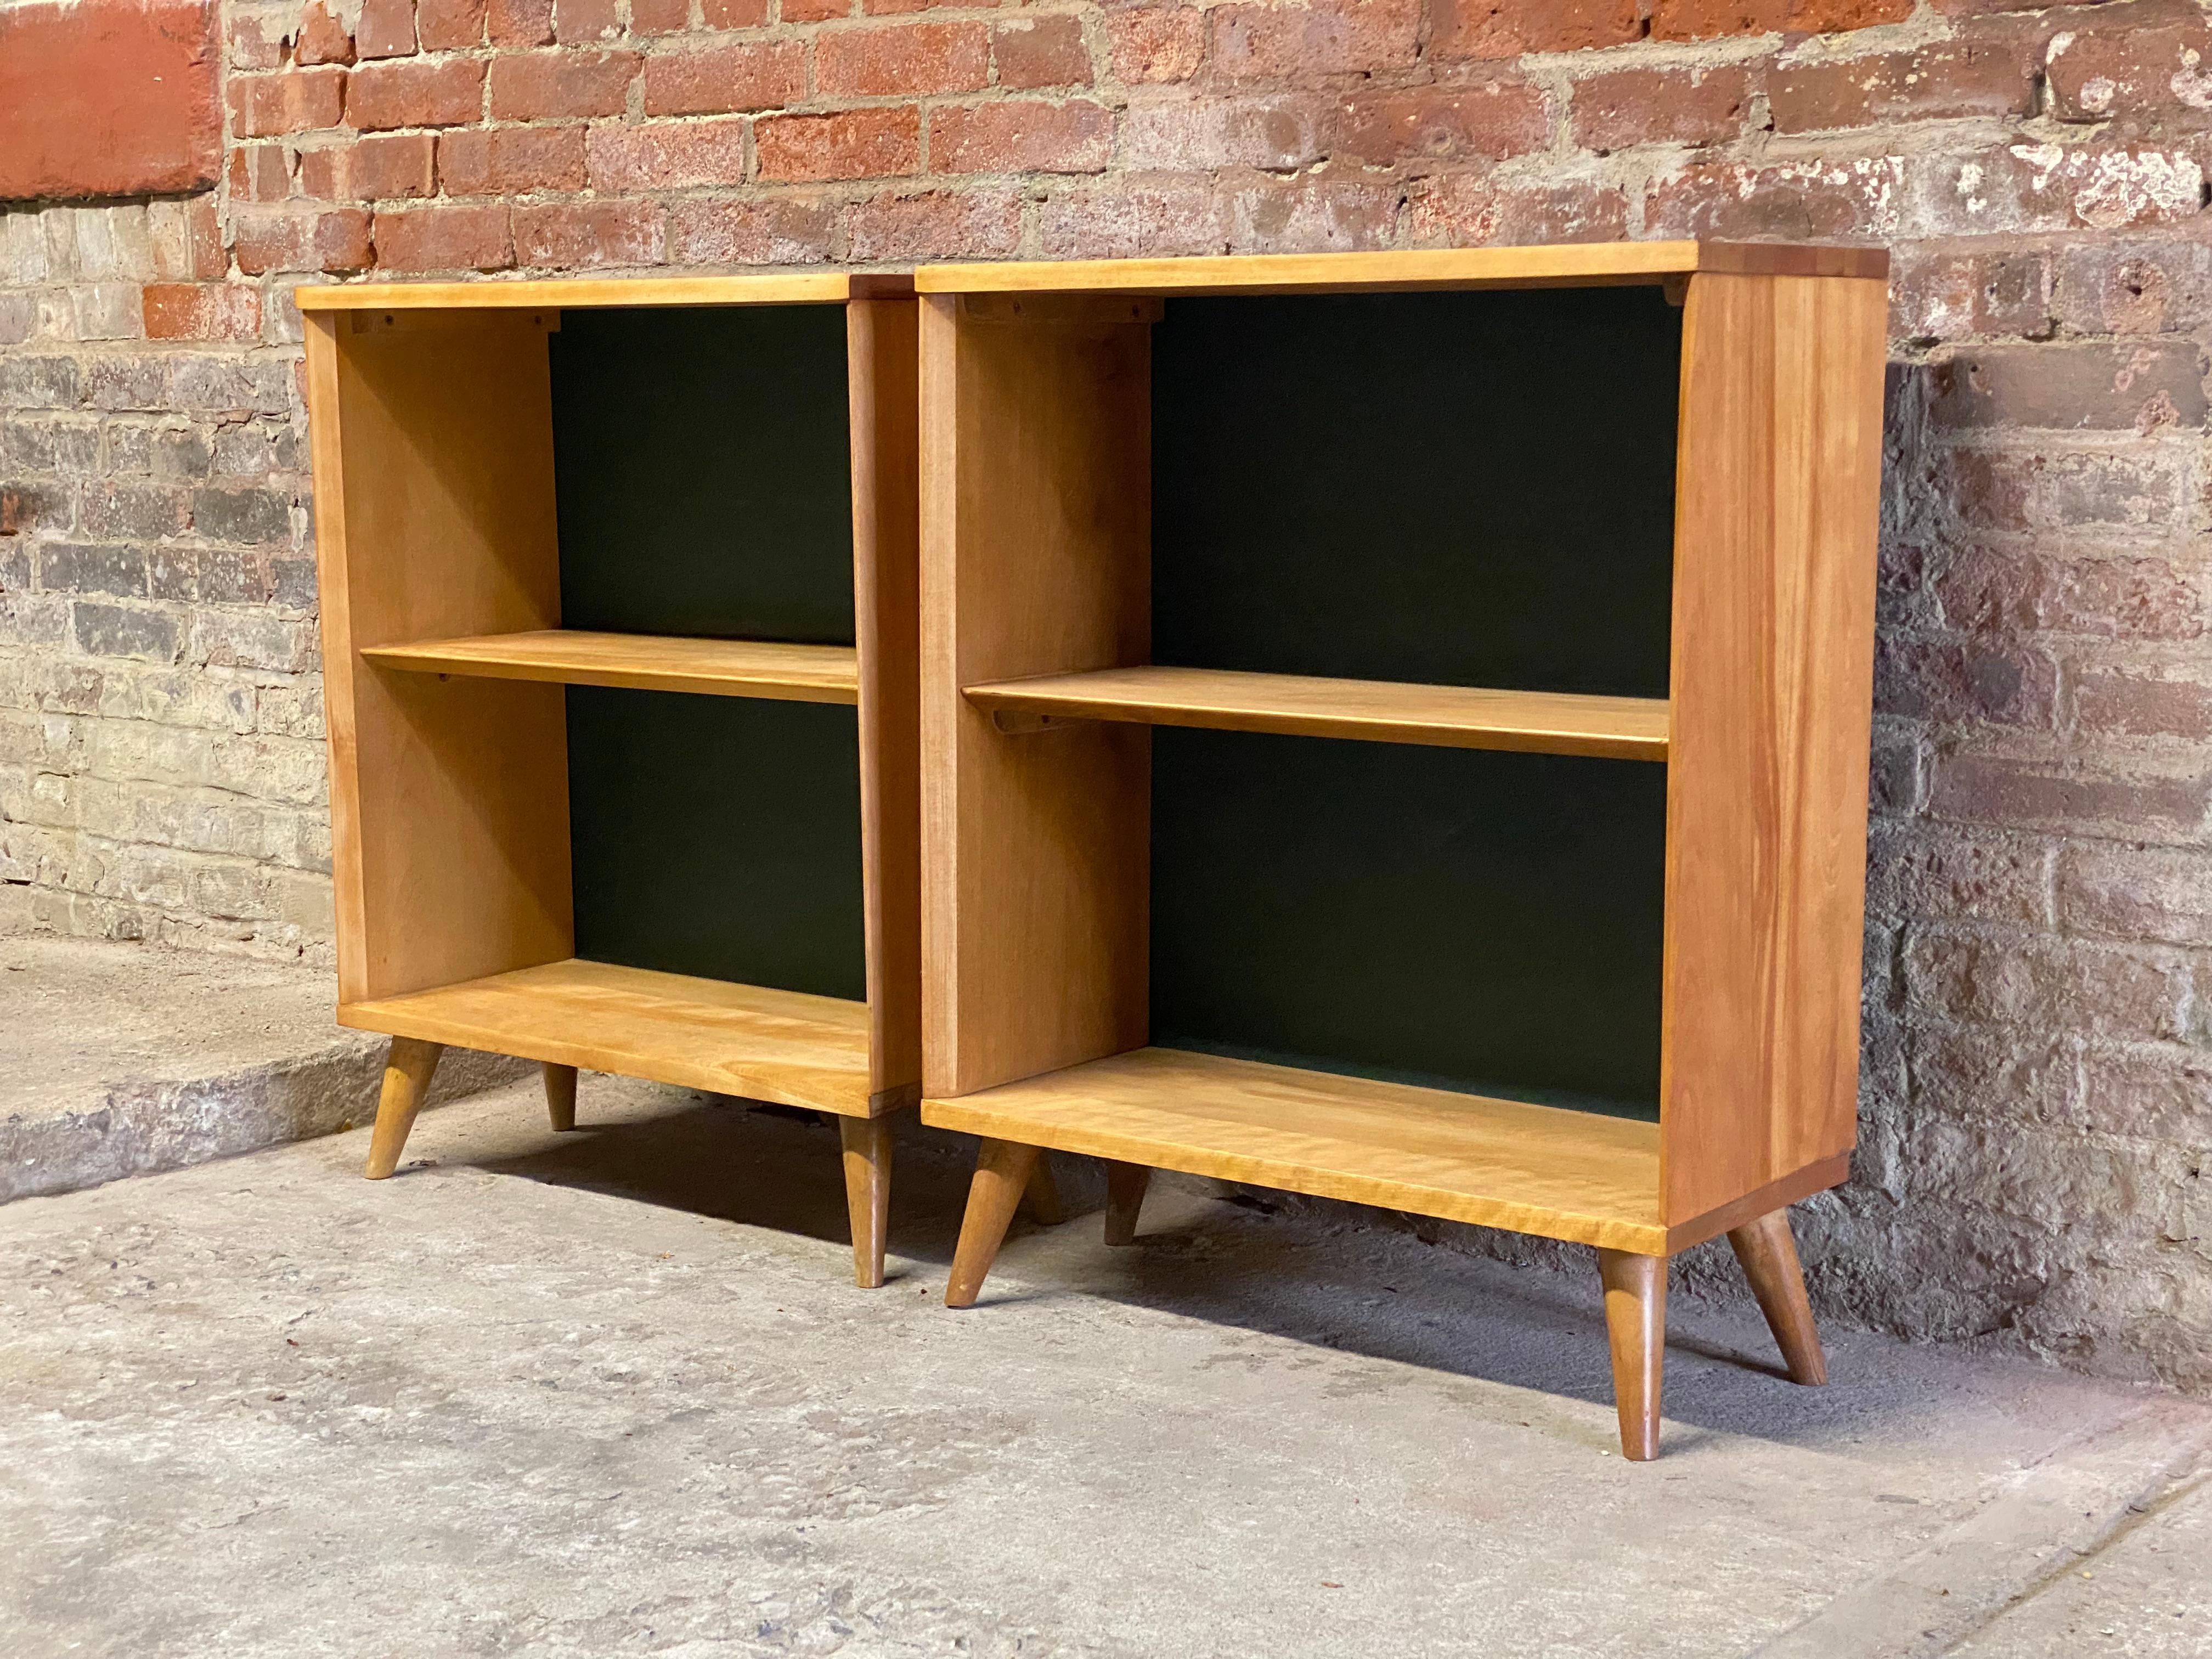 A pair of solid maple with green masonite back bookcases. Great scale and can go anywhere. Circa 1950. Good overall condition and structurally sound and sturdy. Wear commensurate with age and use with bumps, minors scratches, bruises and minor